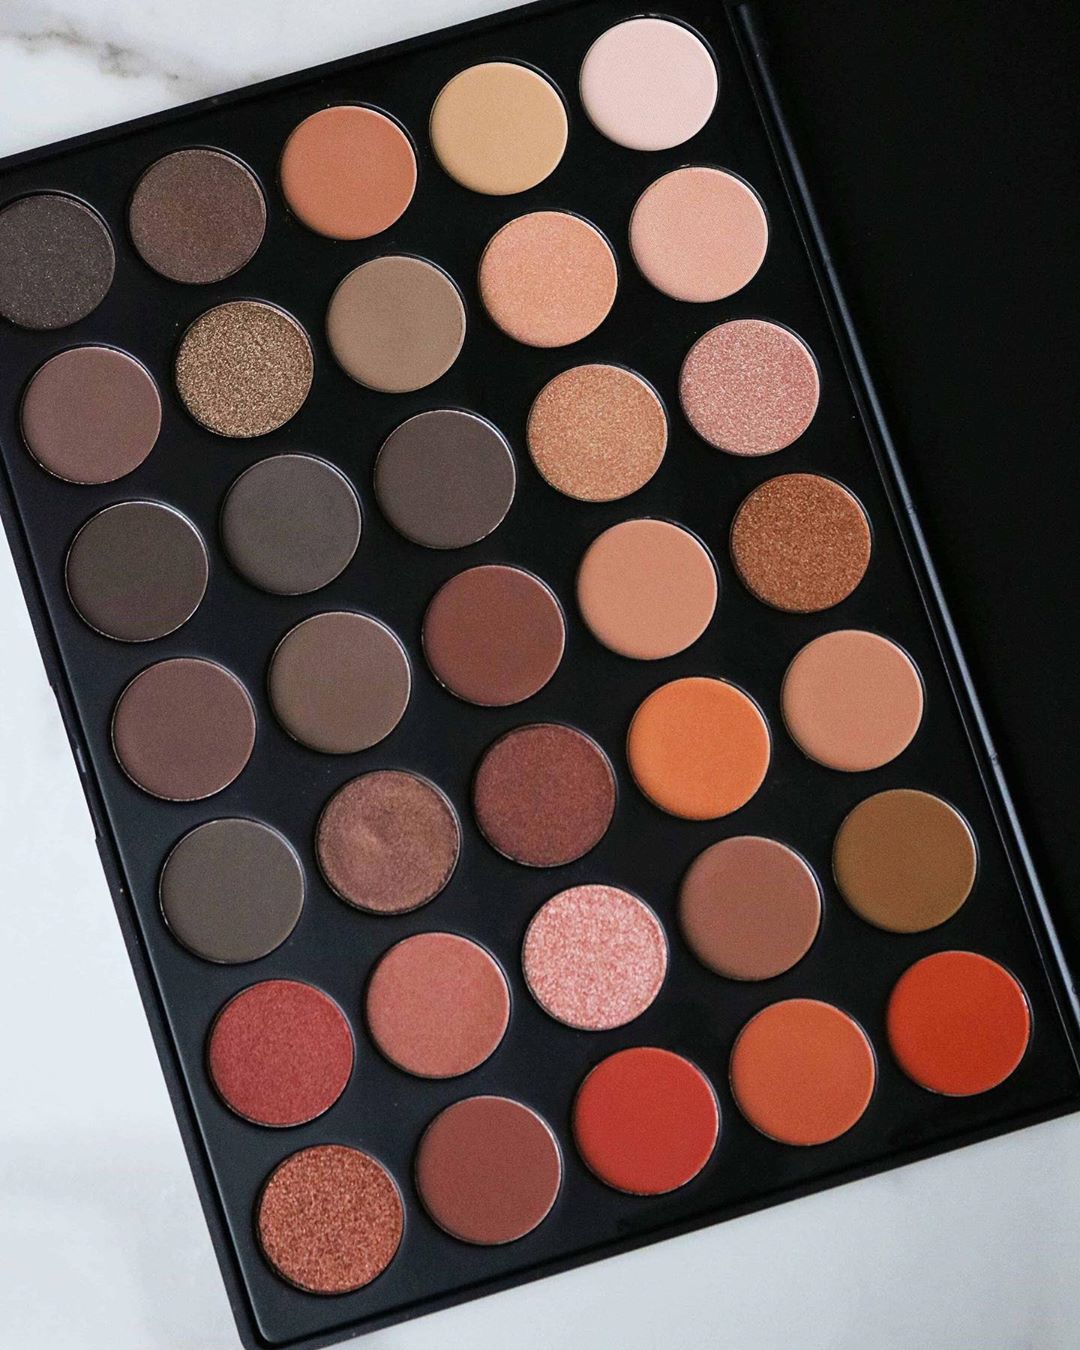 Morphe on X: "💥Grab 50% off our Morphe faves, including our OG 35O Nature  Glow Artistry Palette on https://t.co/Tauaf4i4Wx. 💰💰⁣⁣⁣ ⁣ #morphebabe  Cara (IG:cara_kindlyunspoken) captured all the wearable neutrals shades of  the #